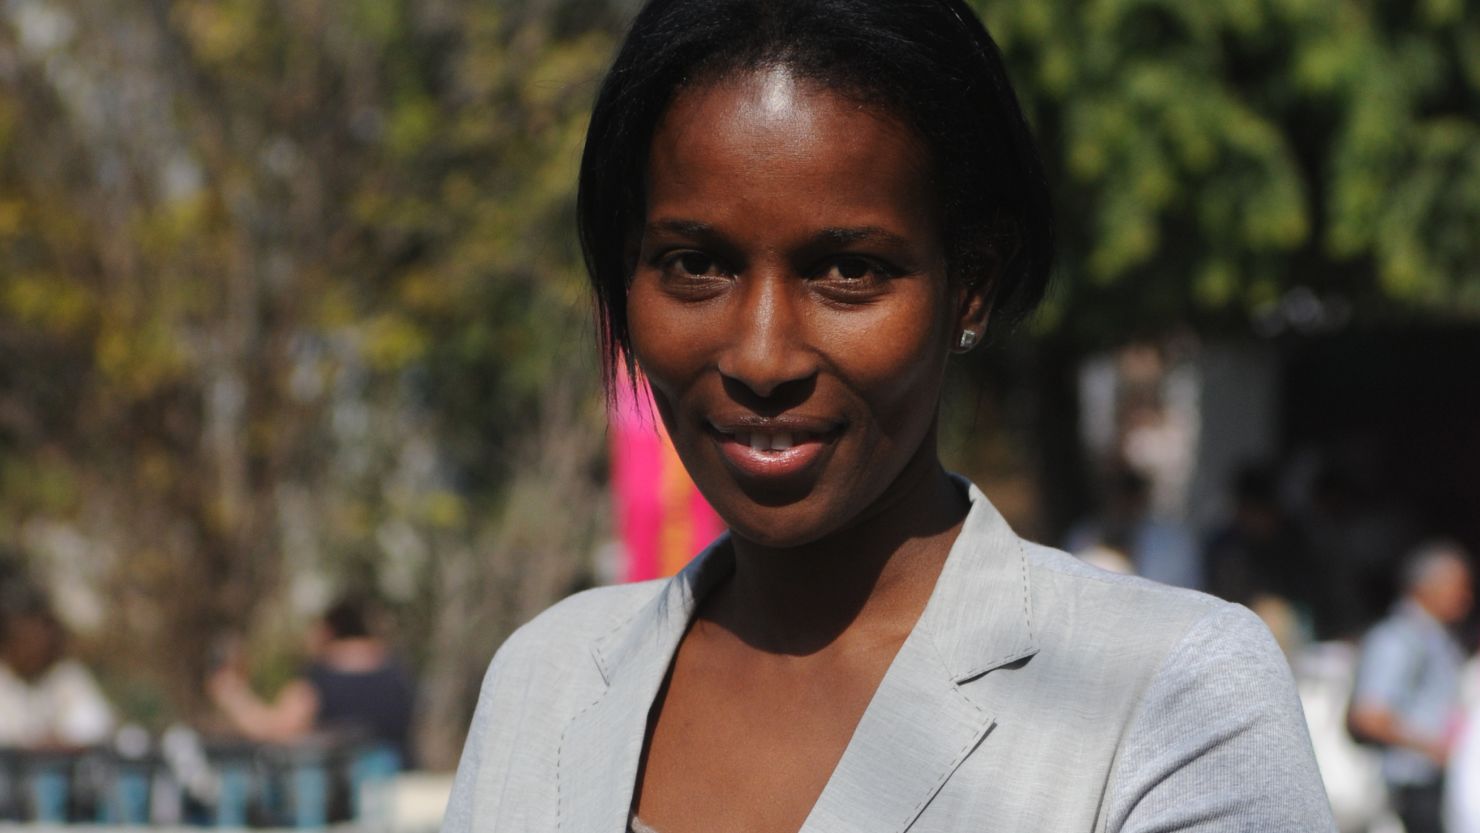 Brandeis University was cowardly to withdraw an honorary degree offer from Ayaan Hirsi Ali, a critic of Islam, says Tim Stanley.